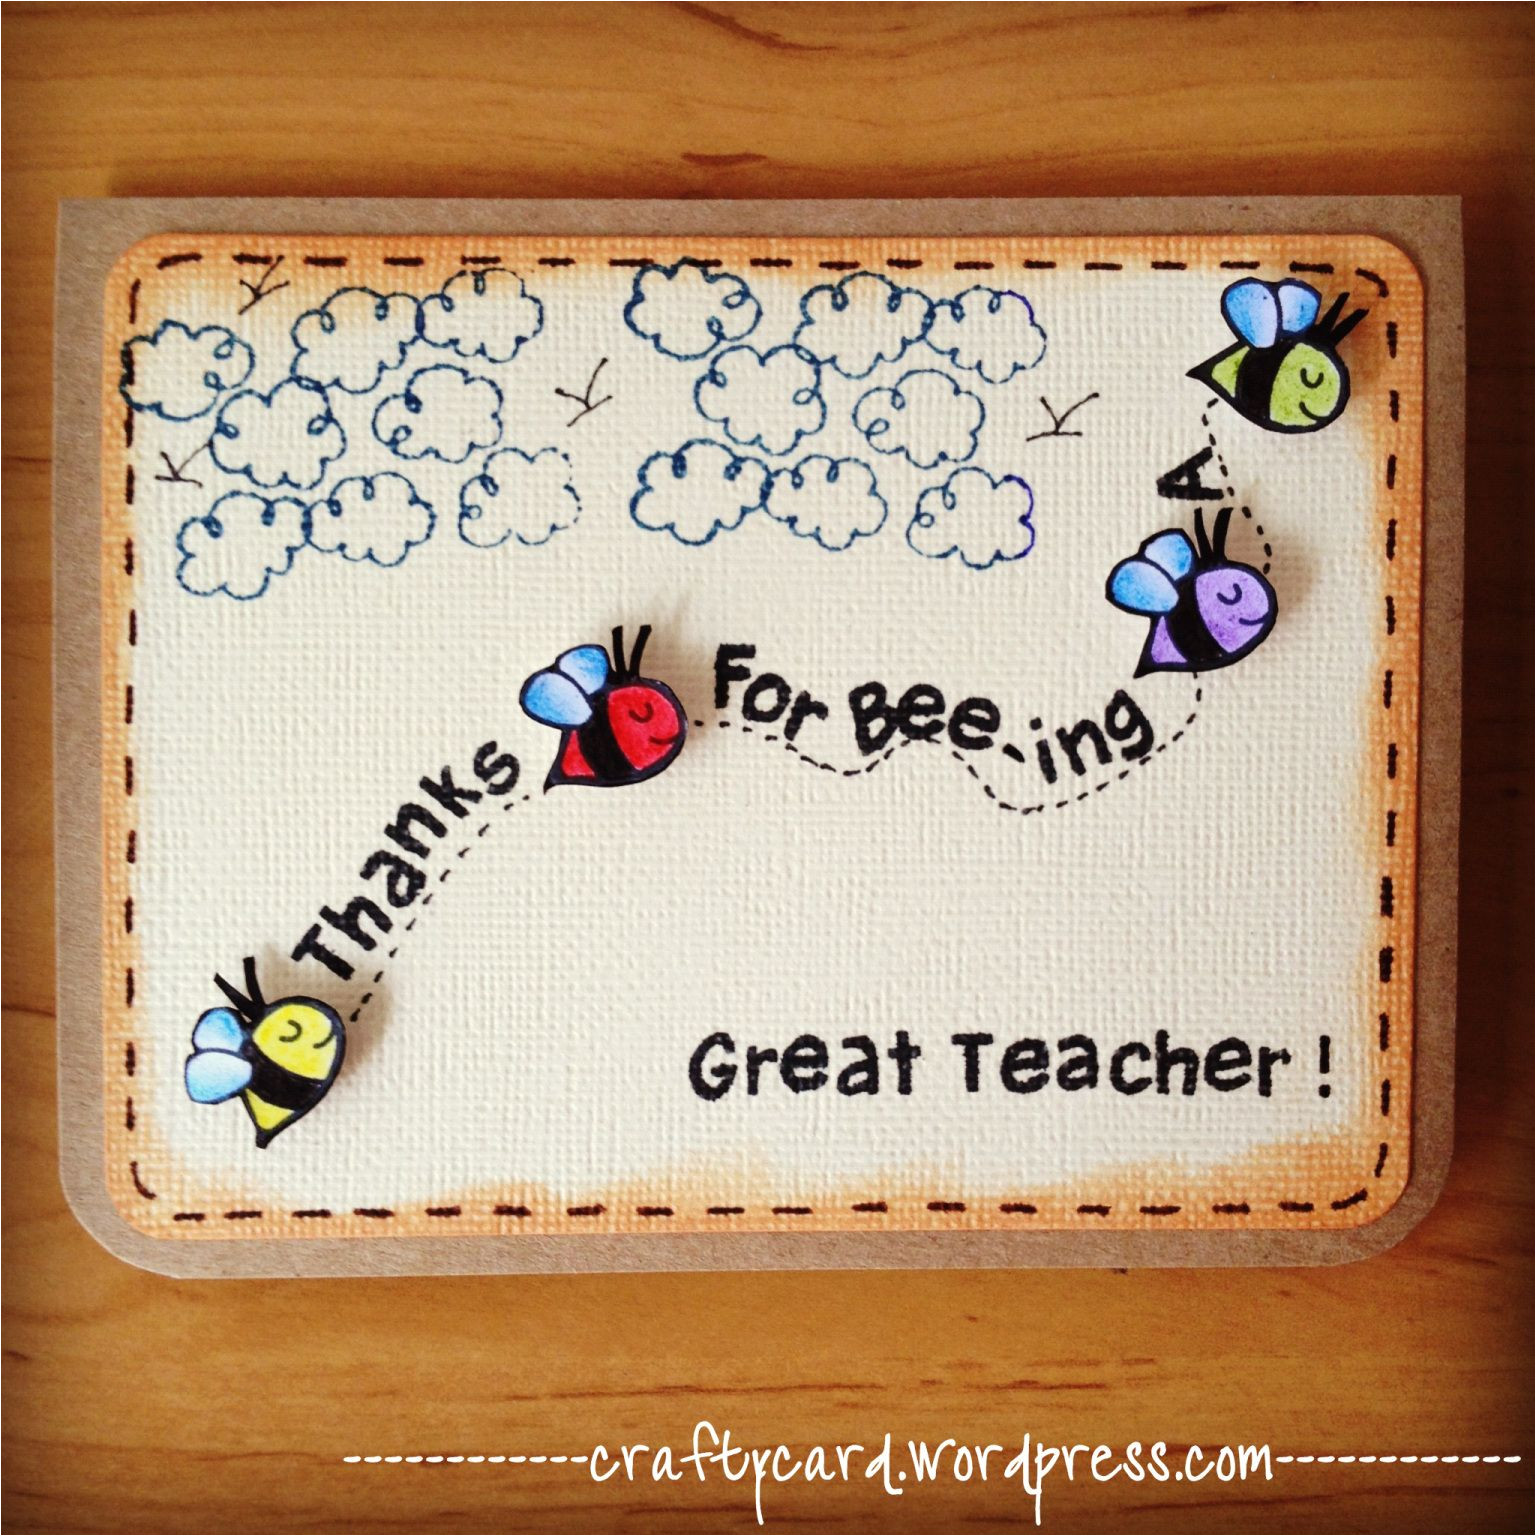 Design for Teachers Day Card M203 Thanks for Bee Ing A Great Teacher with Images